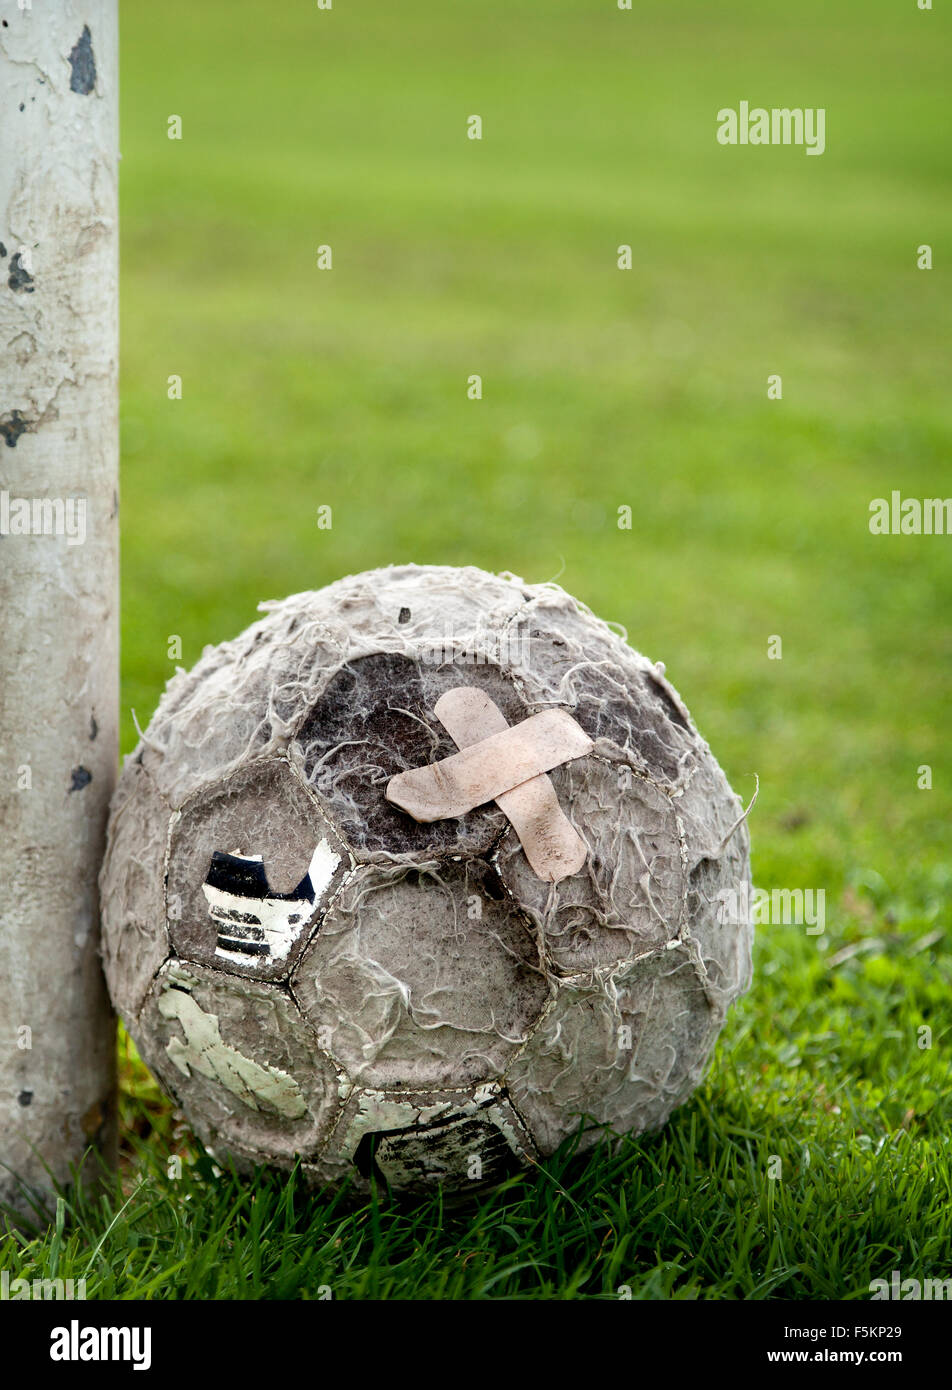 old football with a plaster on it match fixing Stock Photo